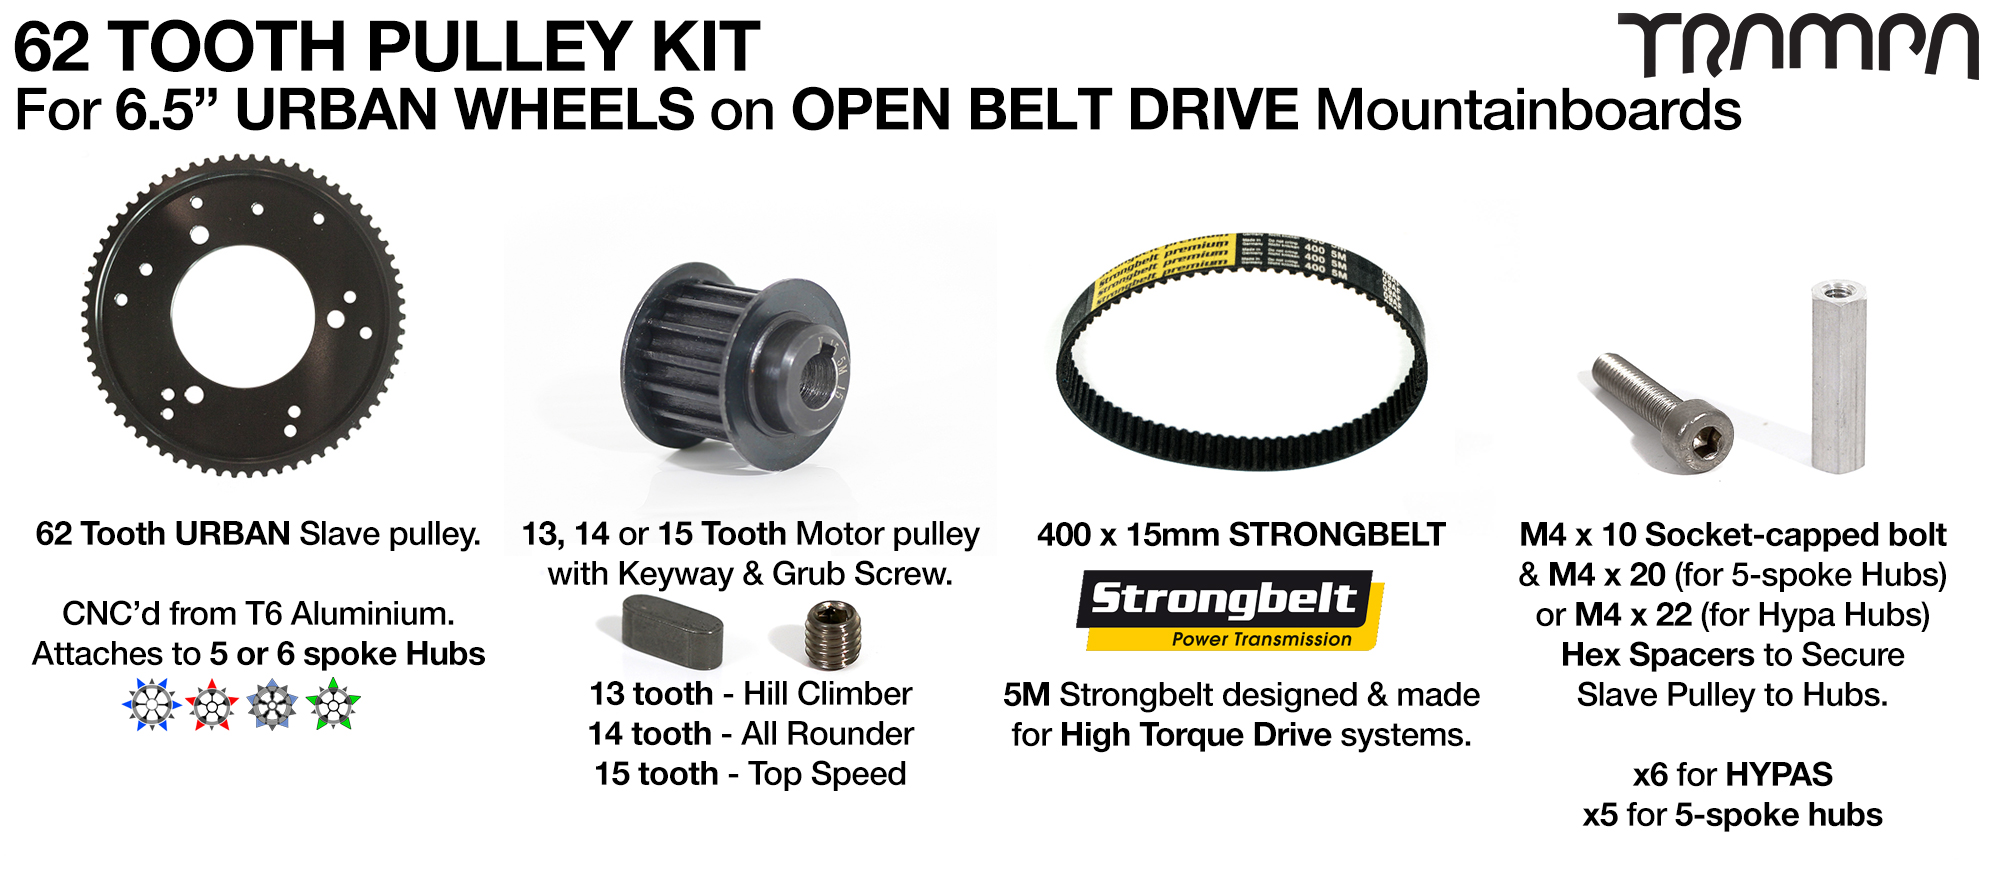 62T OBD 62 Tooth Pulley Kit with 415x 15mm Belt - URBAN Wheels 